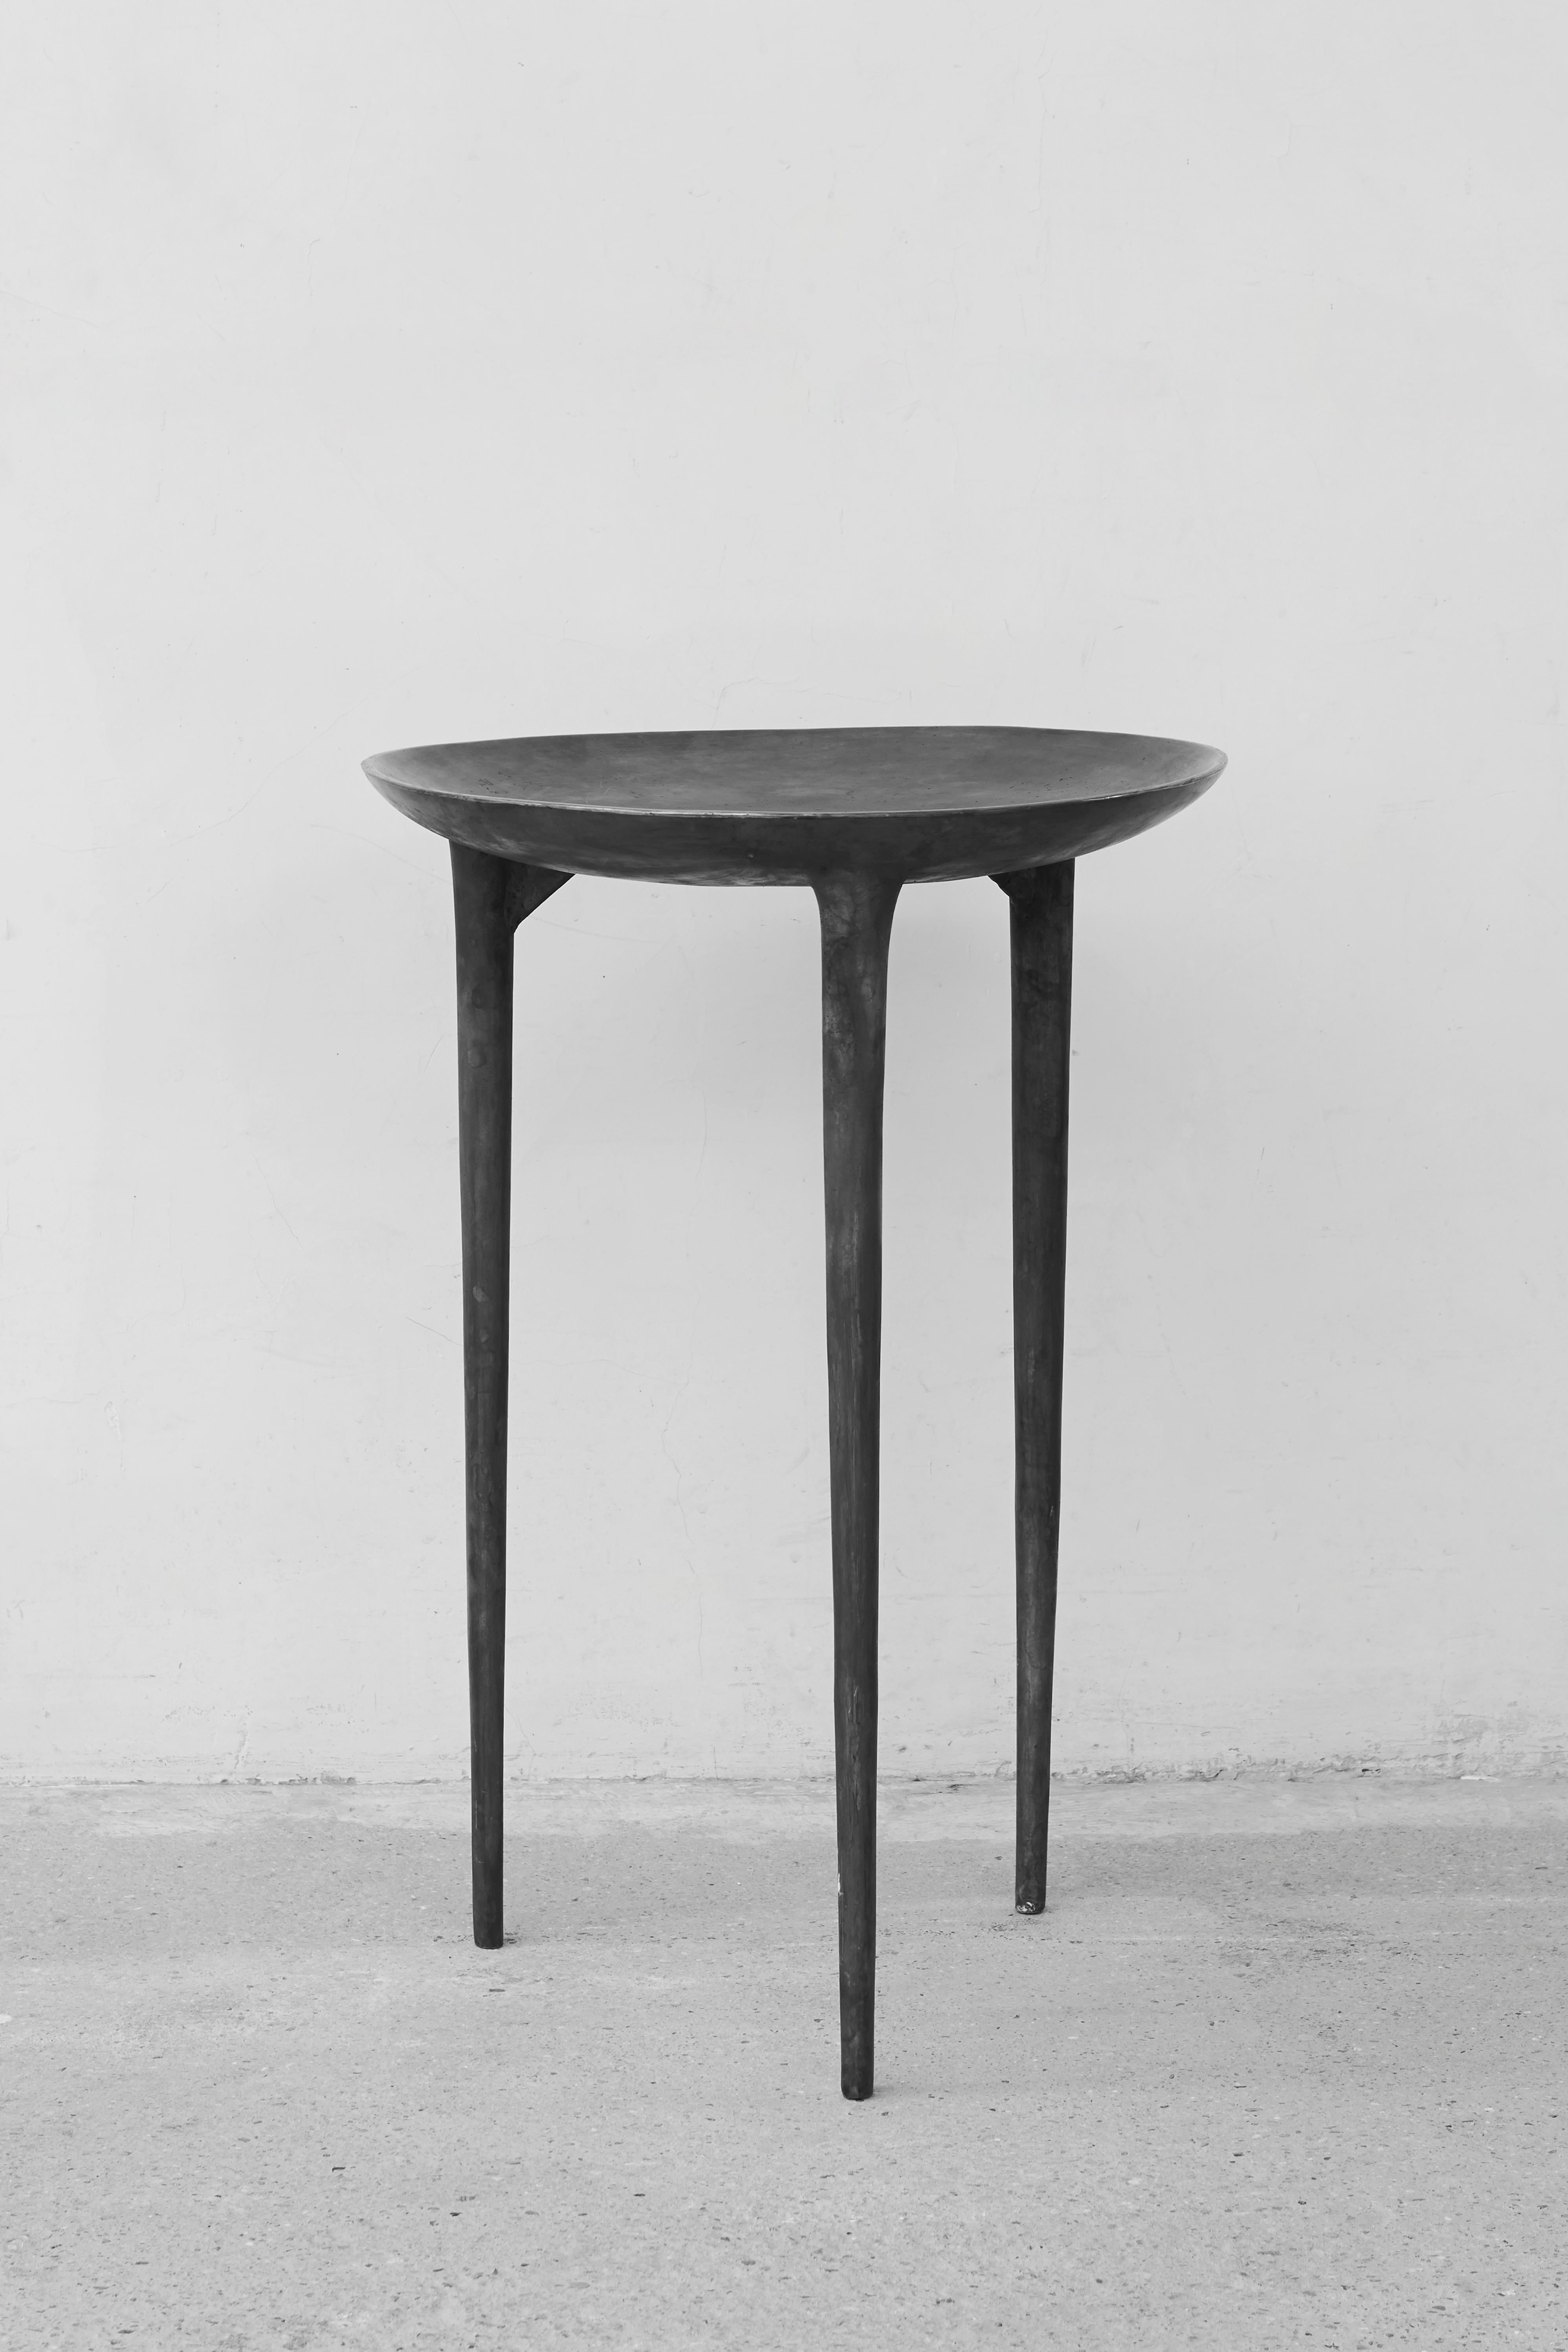 Tall brazier table by Rick Owens
2007
Dimensions: L 42 x W 42 x H 59 cm
Materials: Bronze
Weight: 25 kg

Rick Owens is a California-born fashion and furniture has developed a unique style that he describes as “luxe minimalism.”
Though his